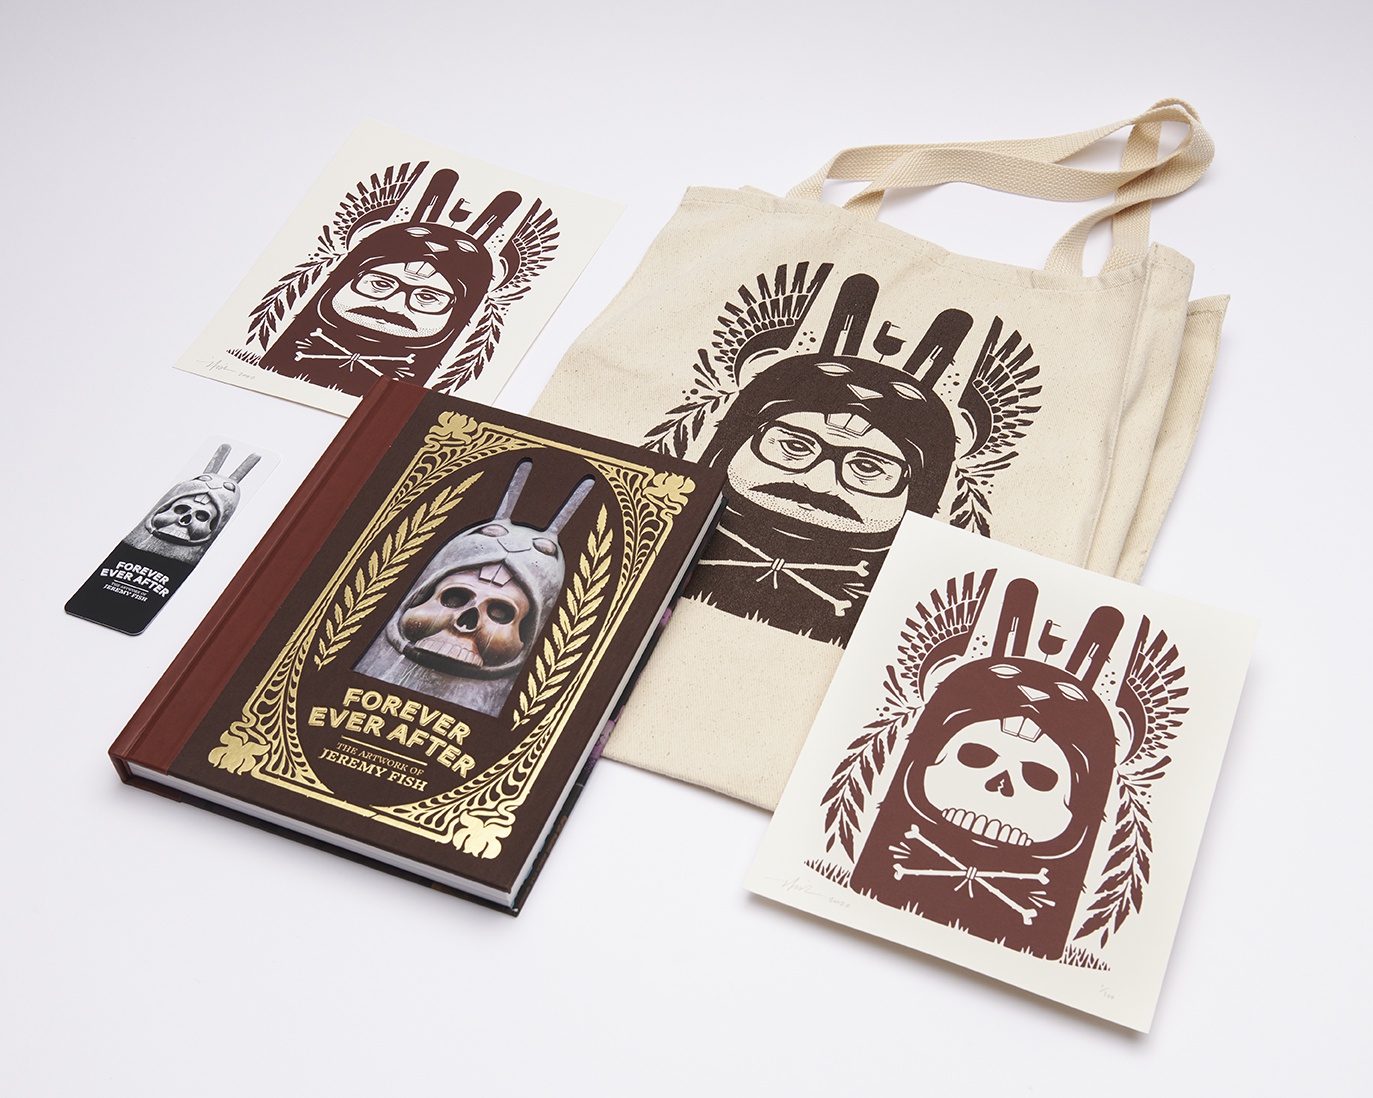 Jeremy Fish deluxe edition package featuring book, tote bag and prints